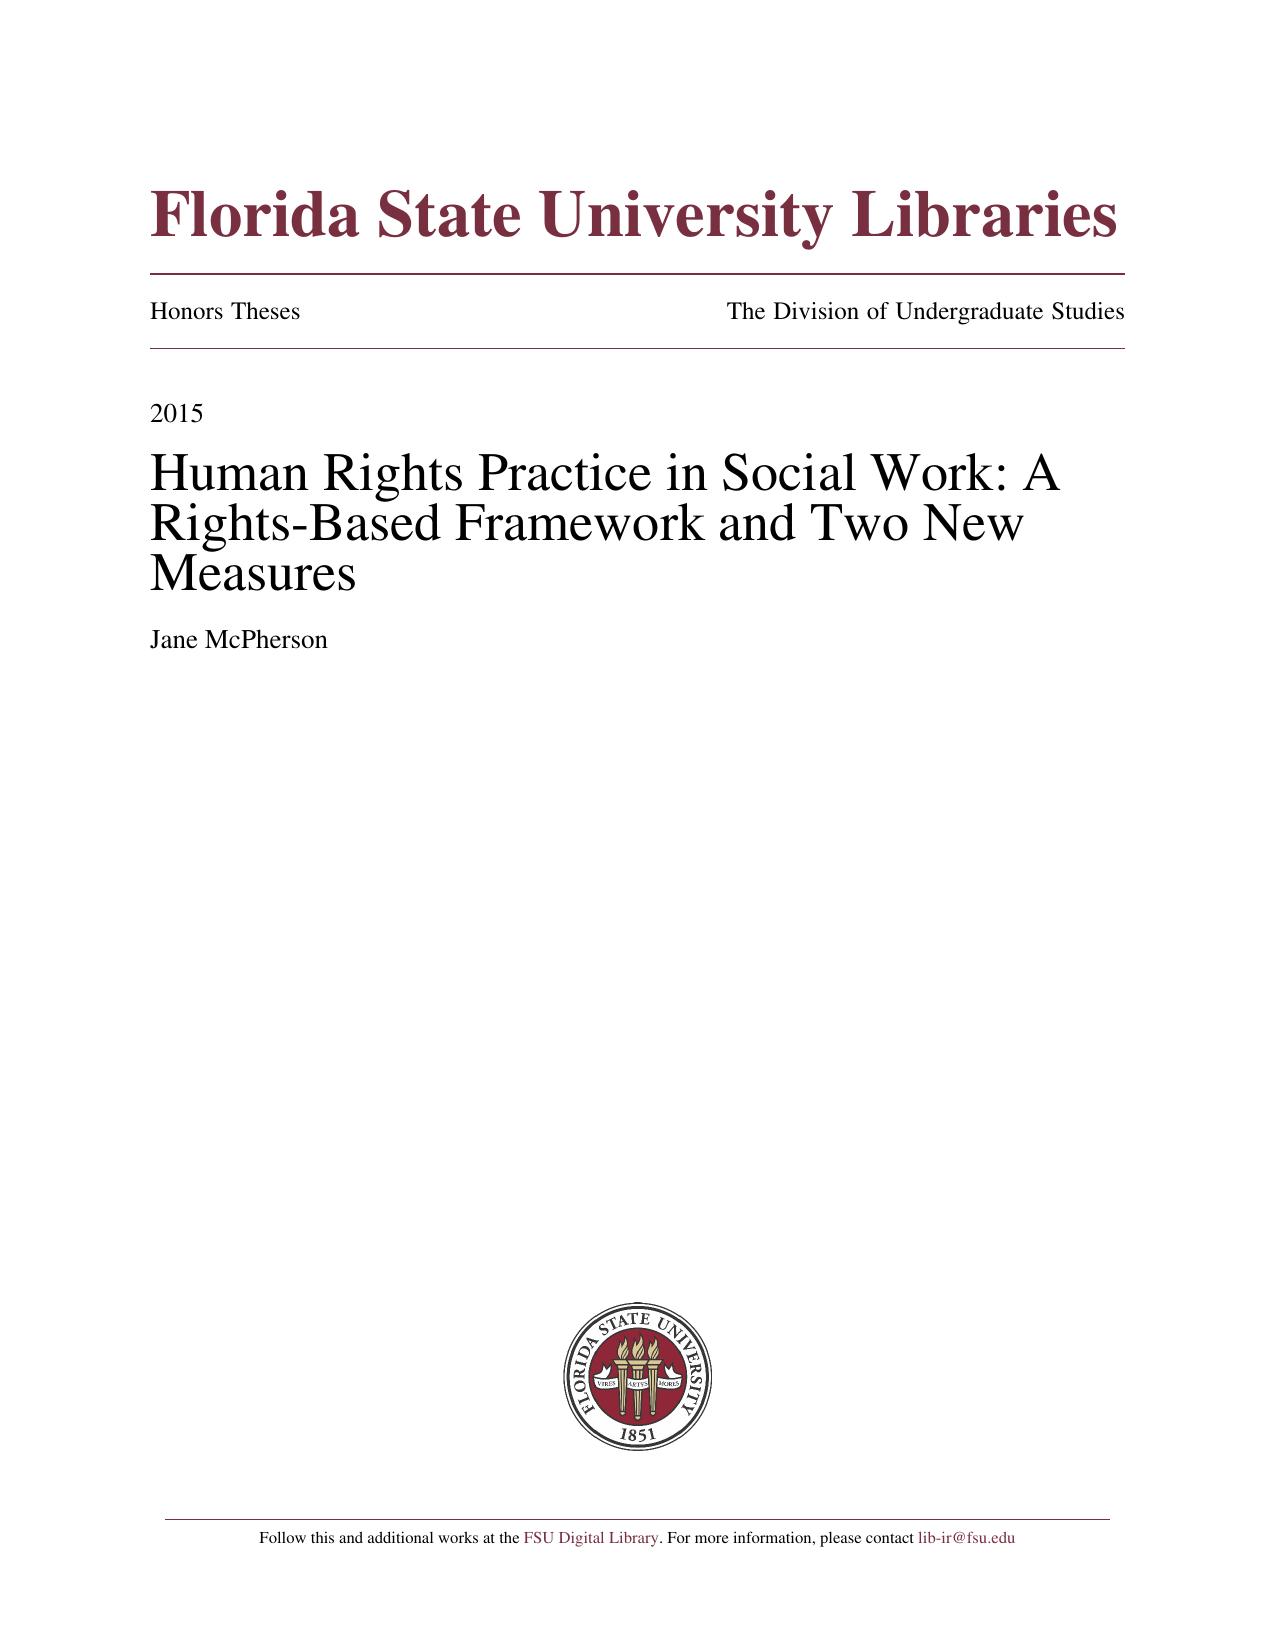 Human Rights Practice in Social Work: A Rights-Based Framework & Two New Measures